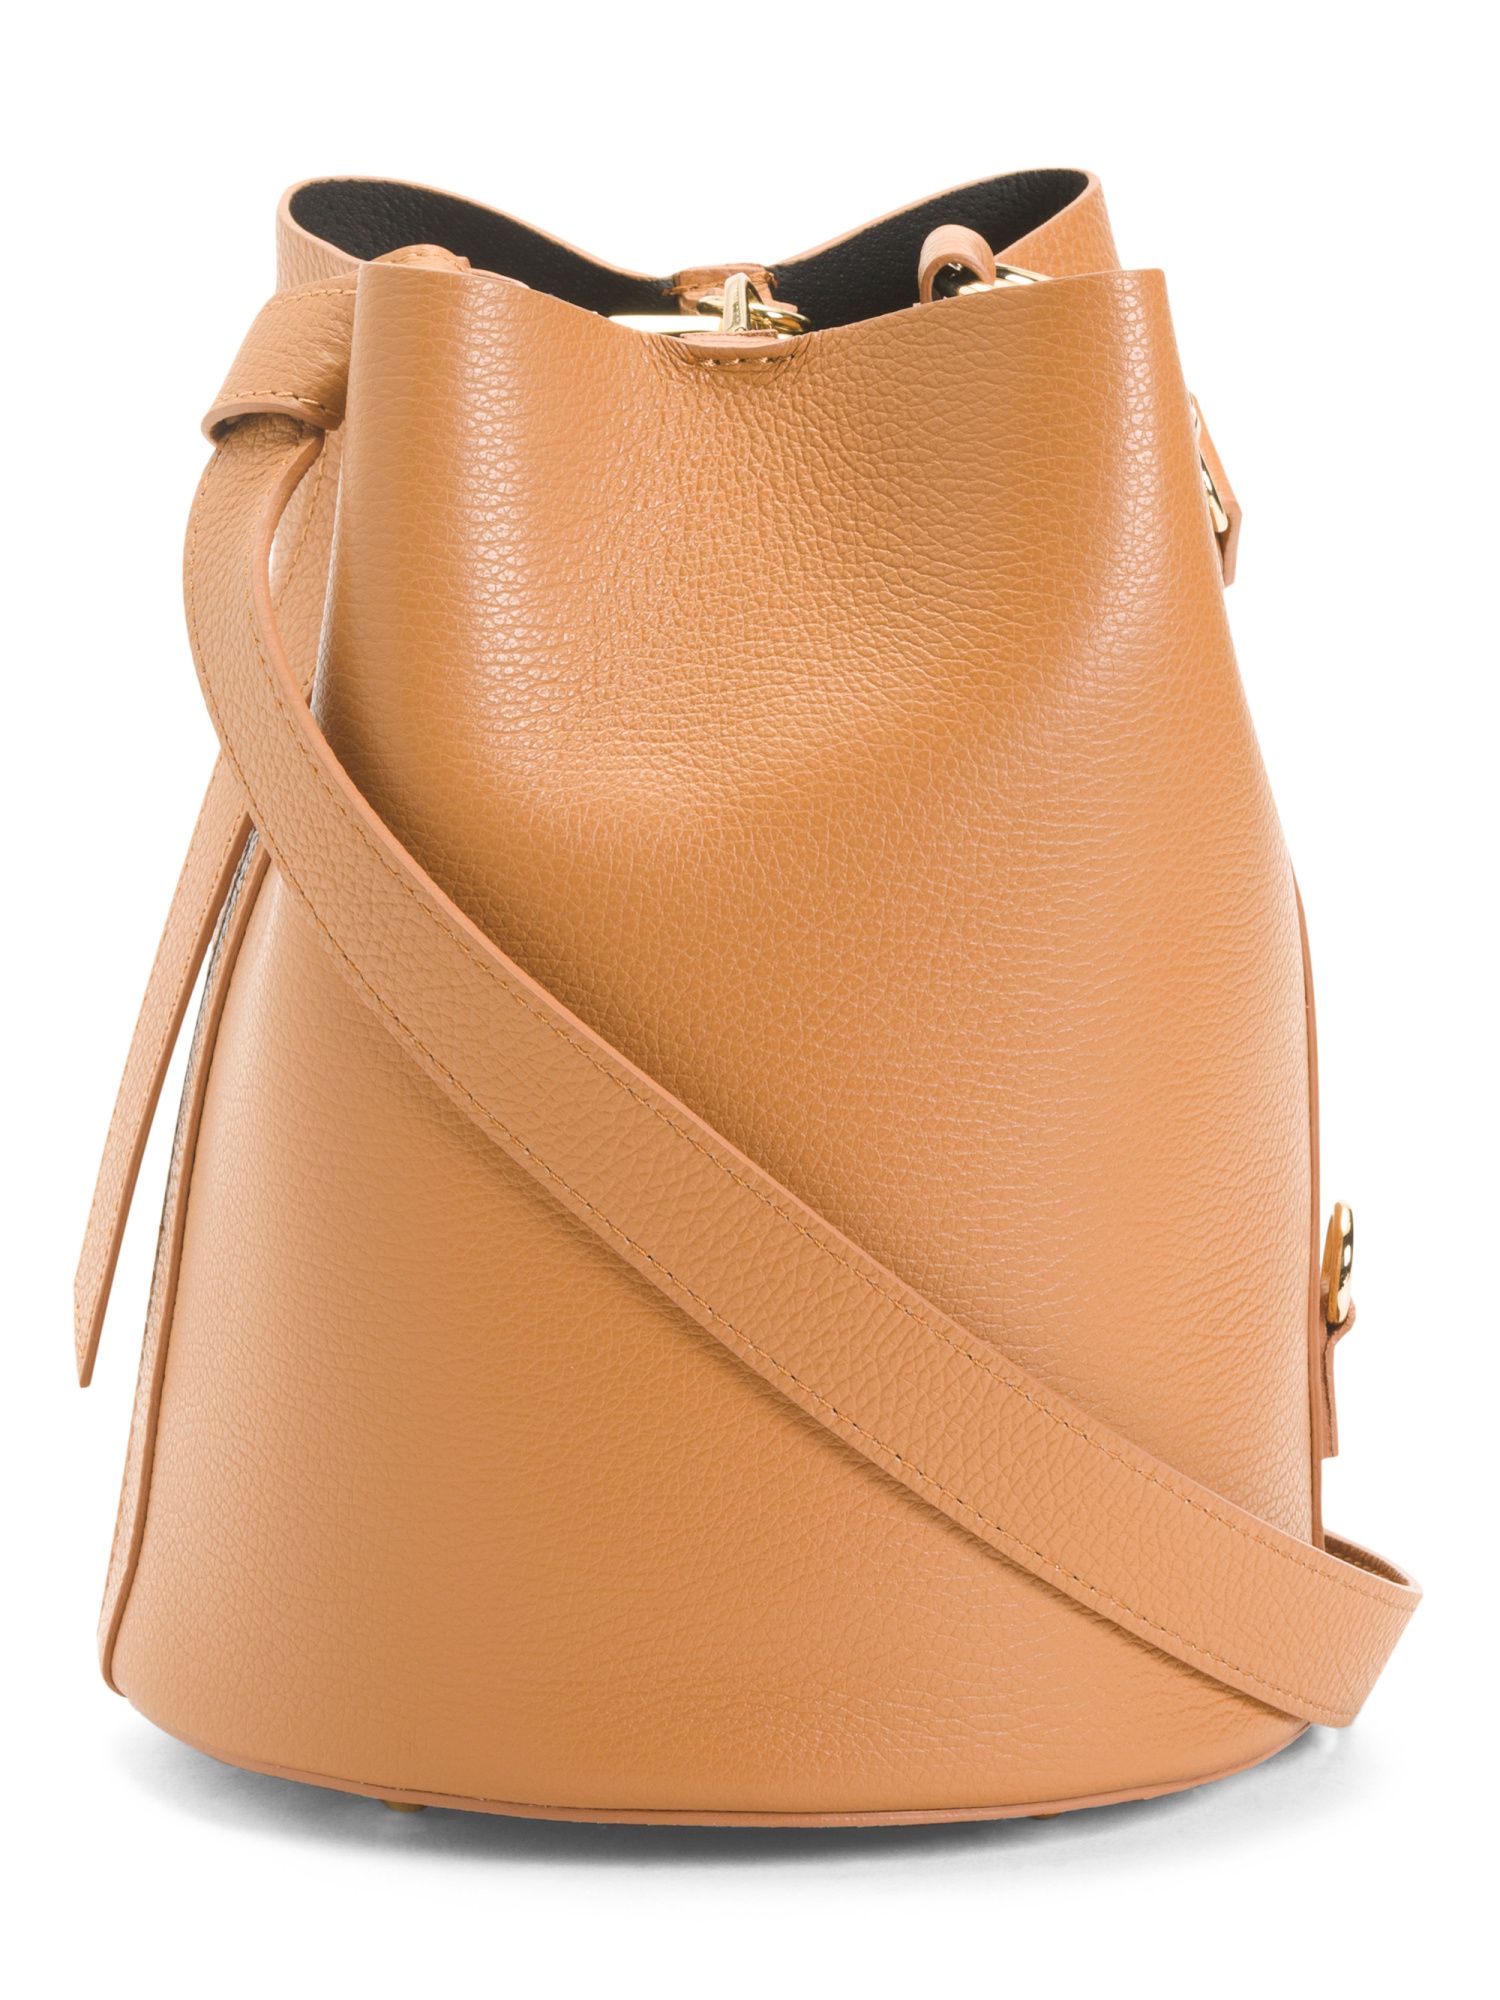 Made In Italy Dog Leash Top Leather Tote | TJ Maxx